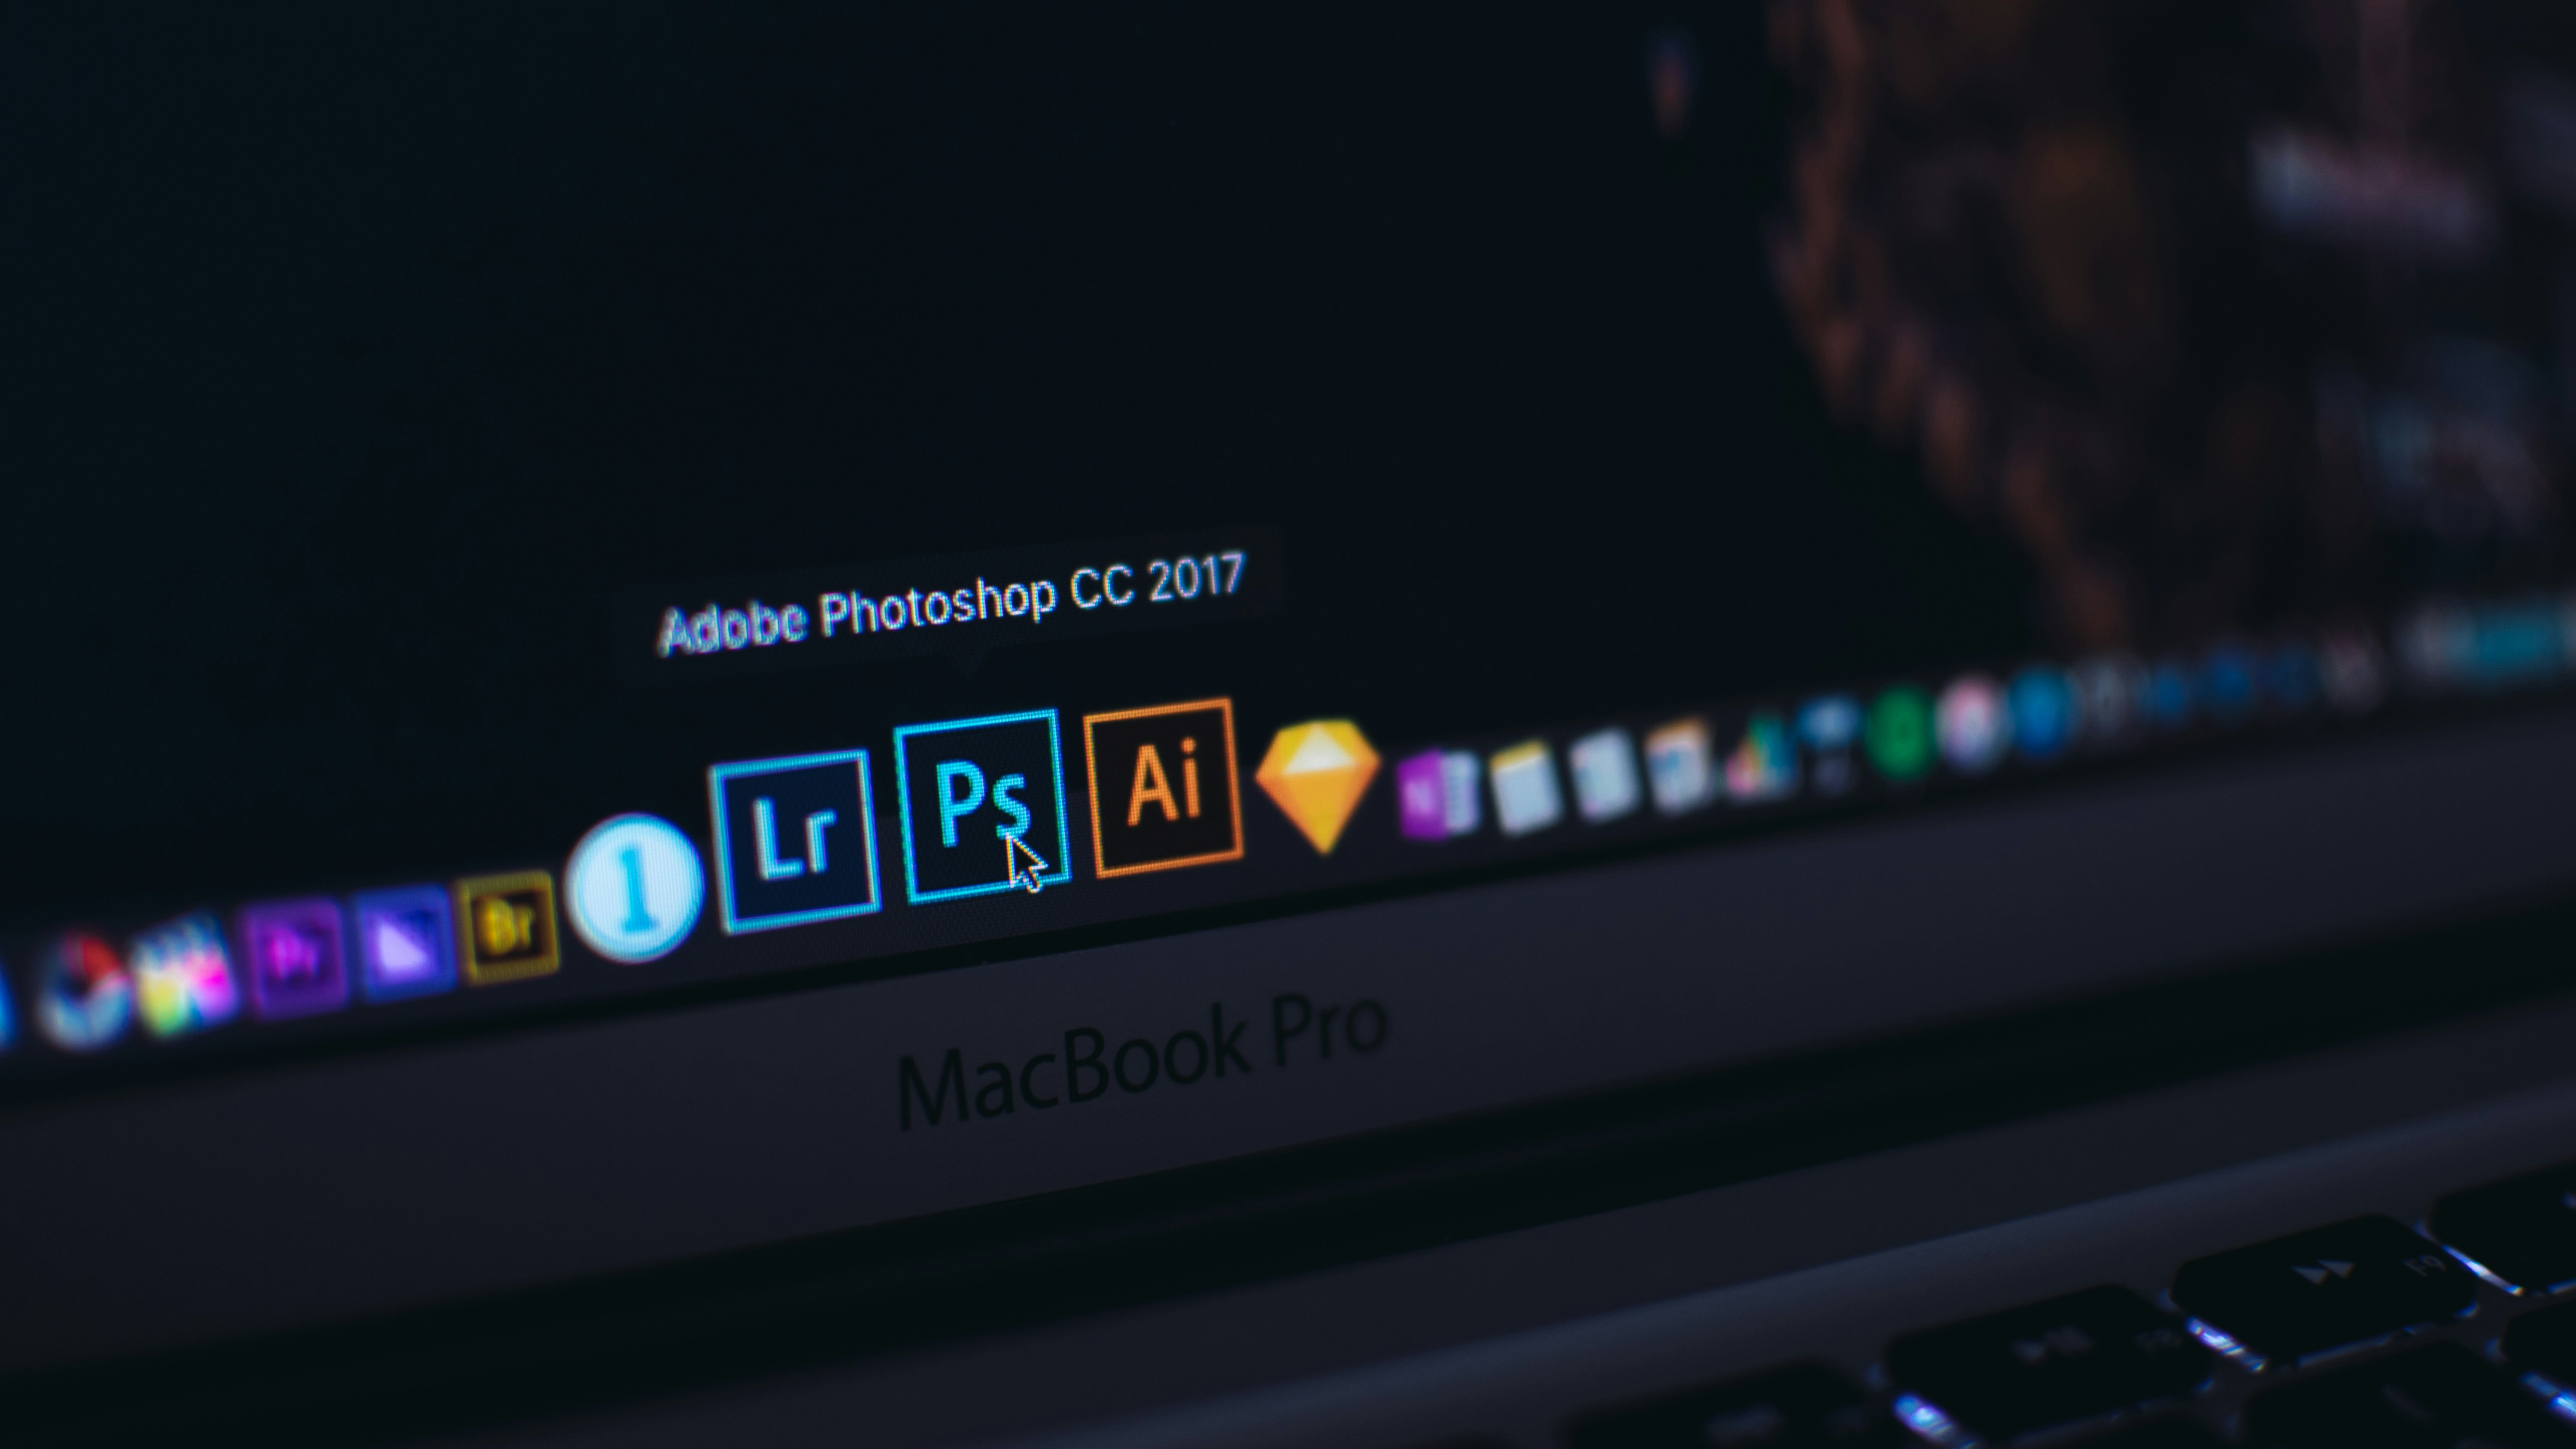 Cancel Adobe Plans without Penalty